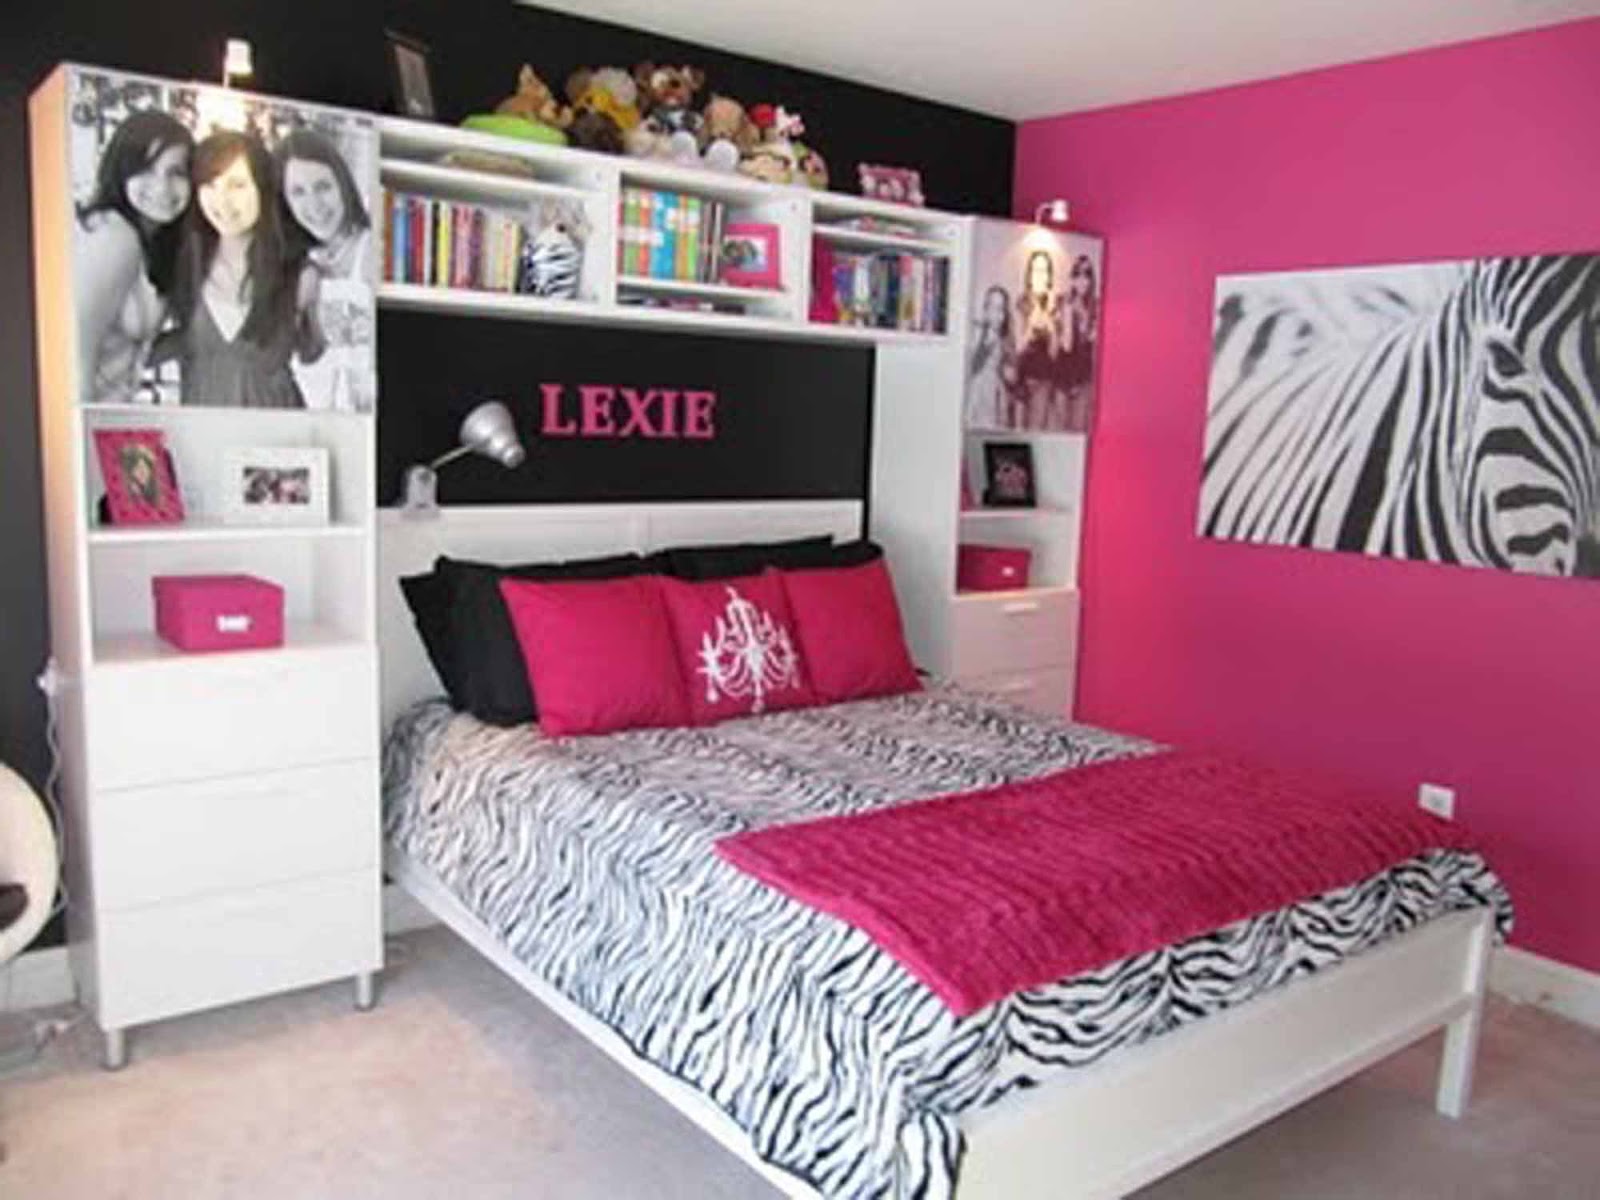 Designs And Architects: Colors for youth bedroom